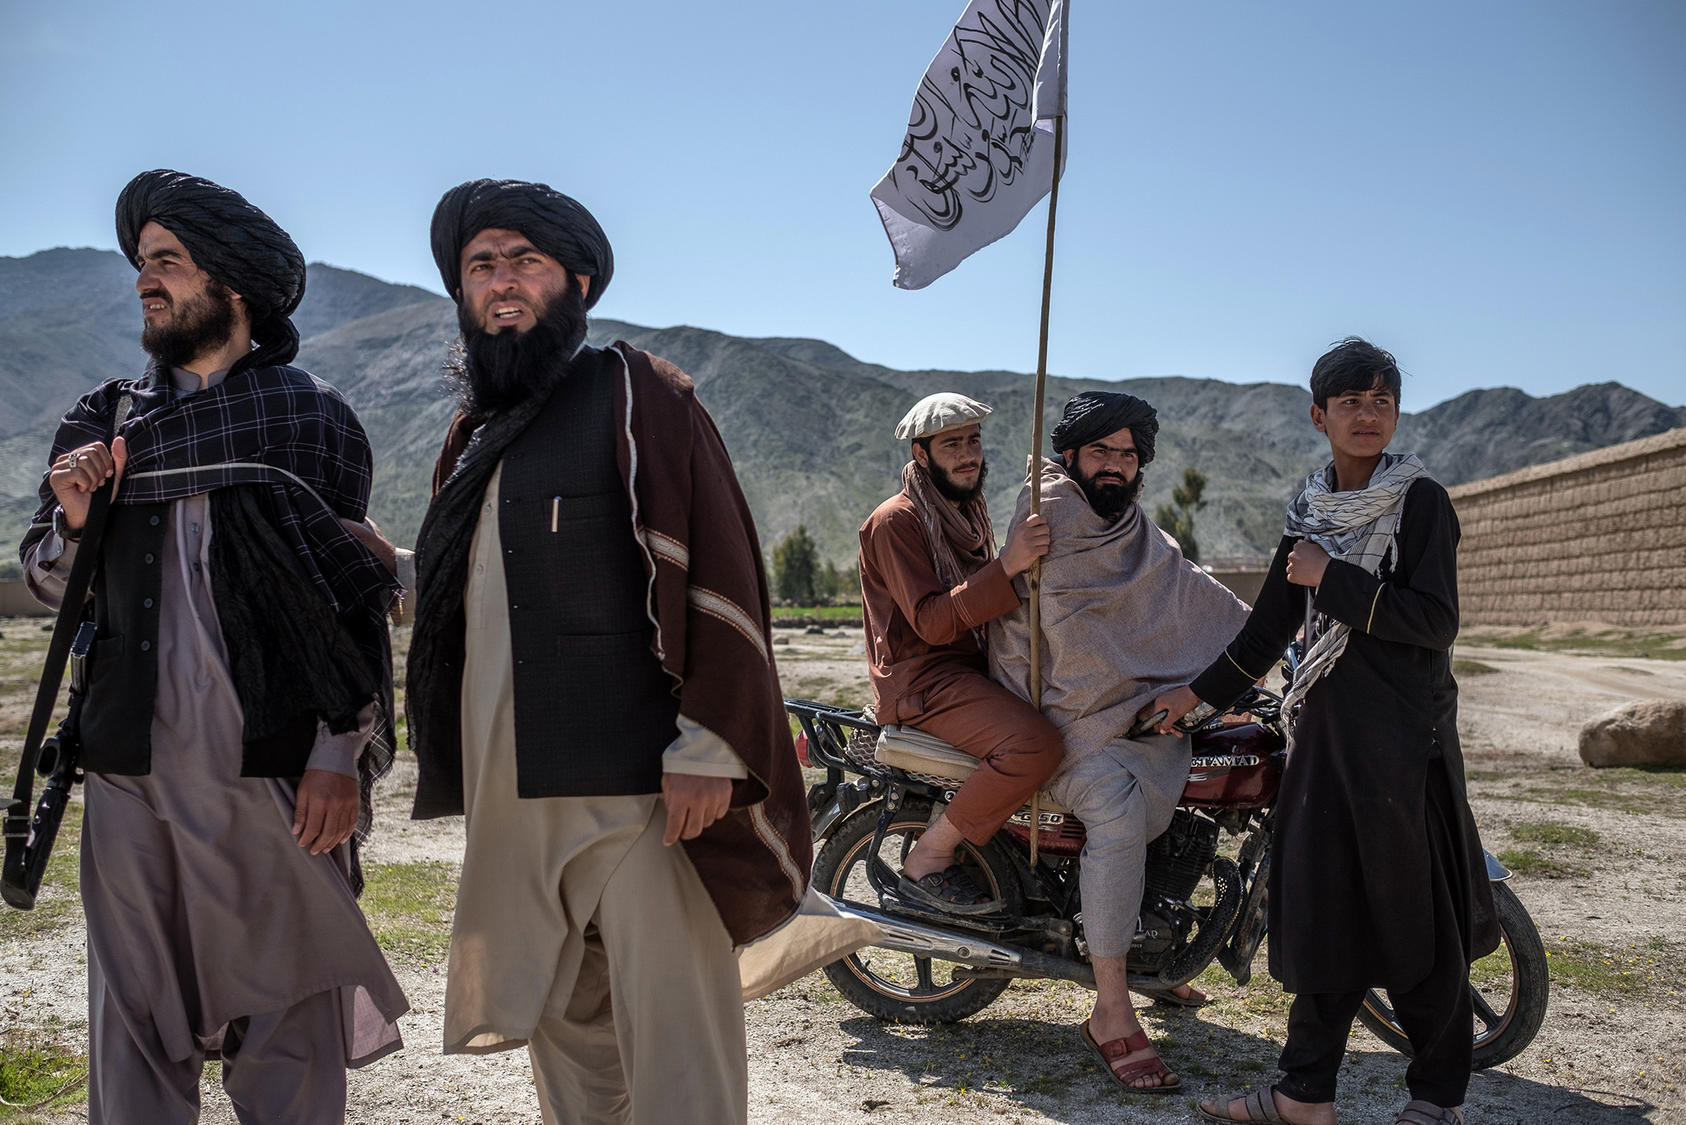 Taliban fighters in Afghanistan, on March 13, 2020, where more than two decades of fighting have created widespread trauma. (Jim Huylebroek/New York Times)